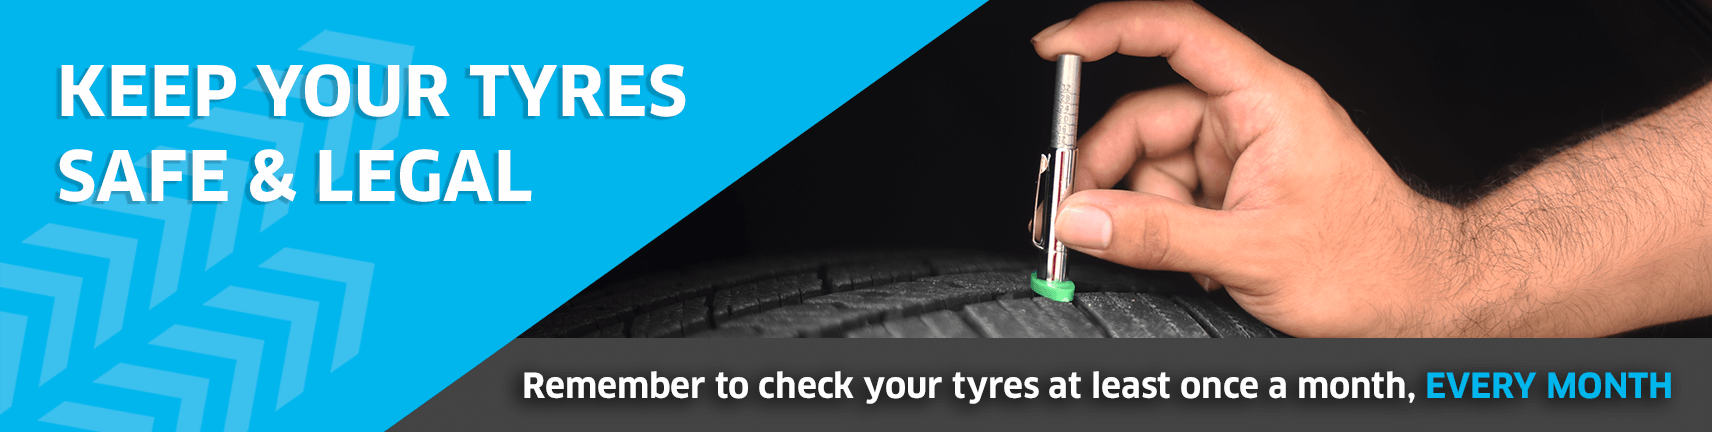 Keep your tyres safe and legal - remember to check your tyres at least once a month, every month - image of a TDG16 gauge being used to check tread depth